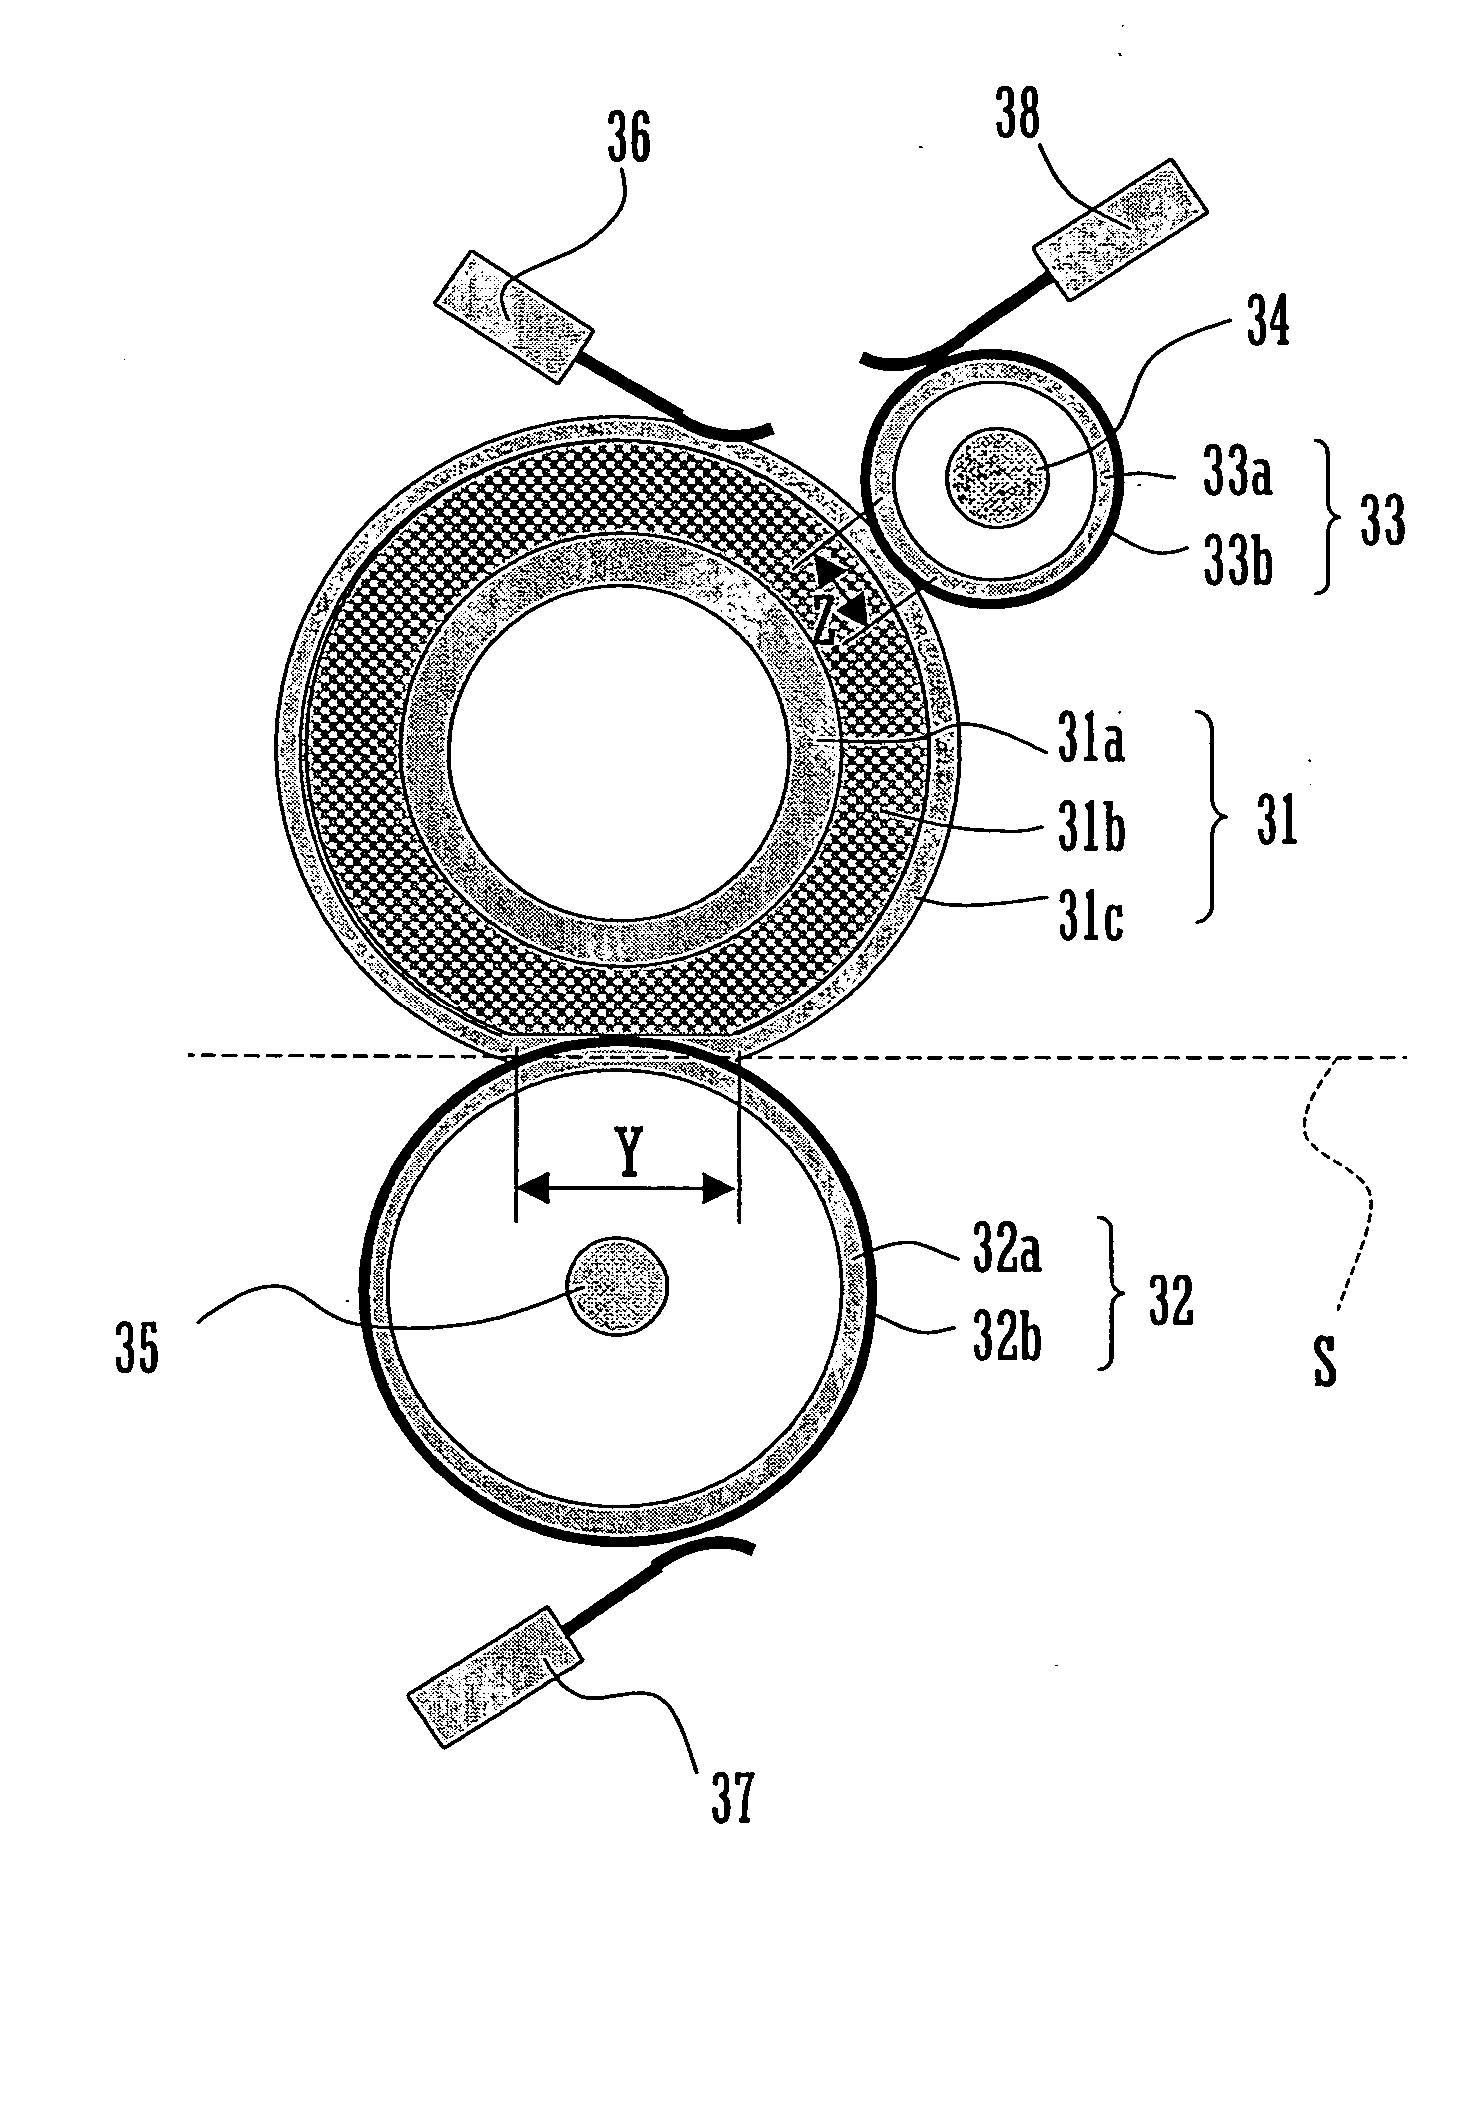 Heating device and heating method